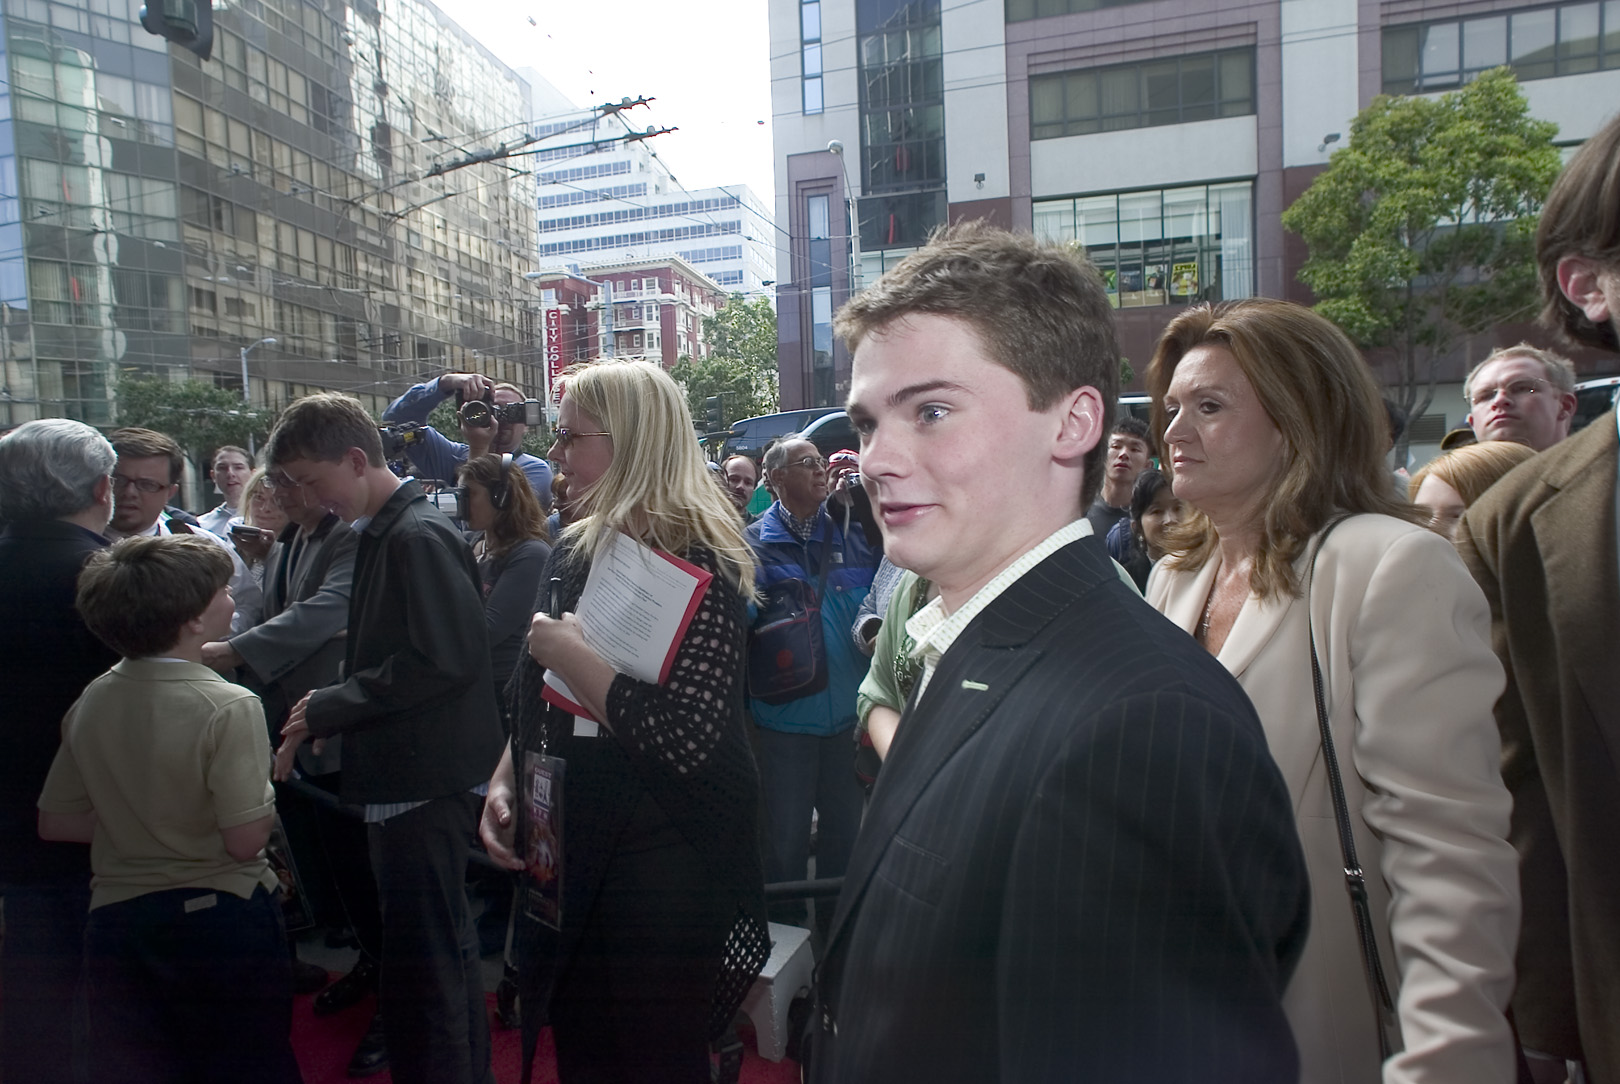 Jake Lloyd attends the world premiere of "Star Wars: Episode III - Revenge of the Sith"  on May 12, 2005 in San Francisco, California | Source: Getty images